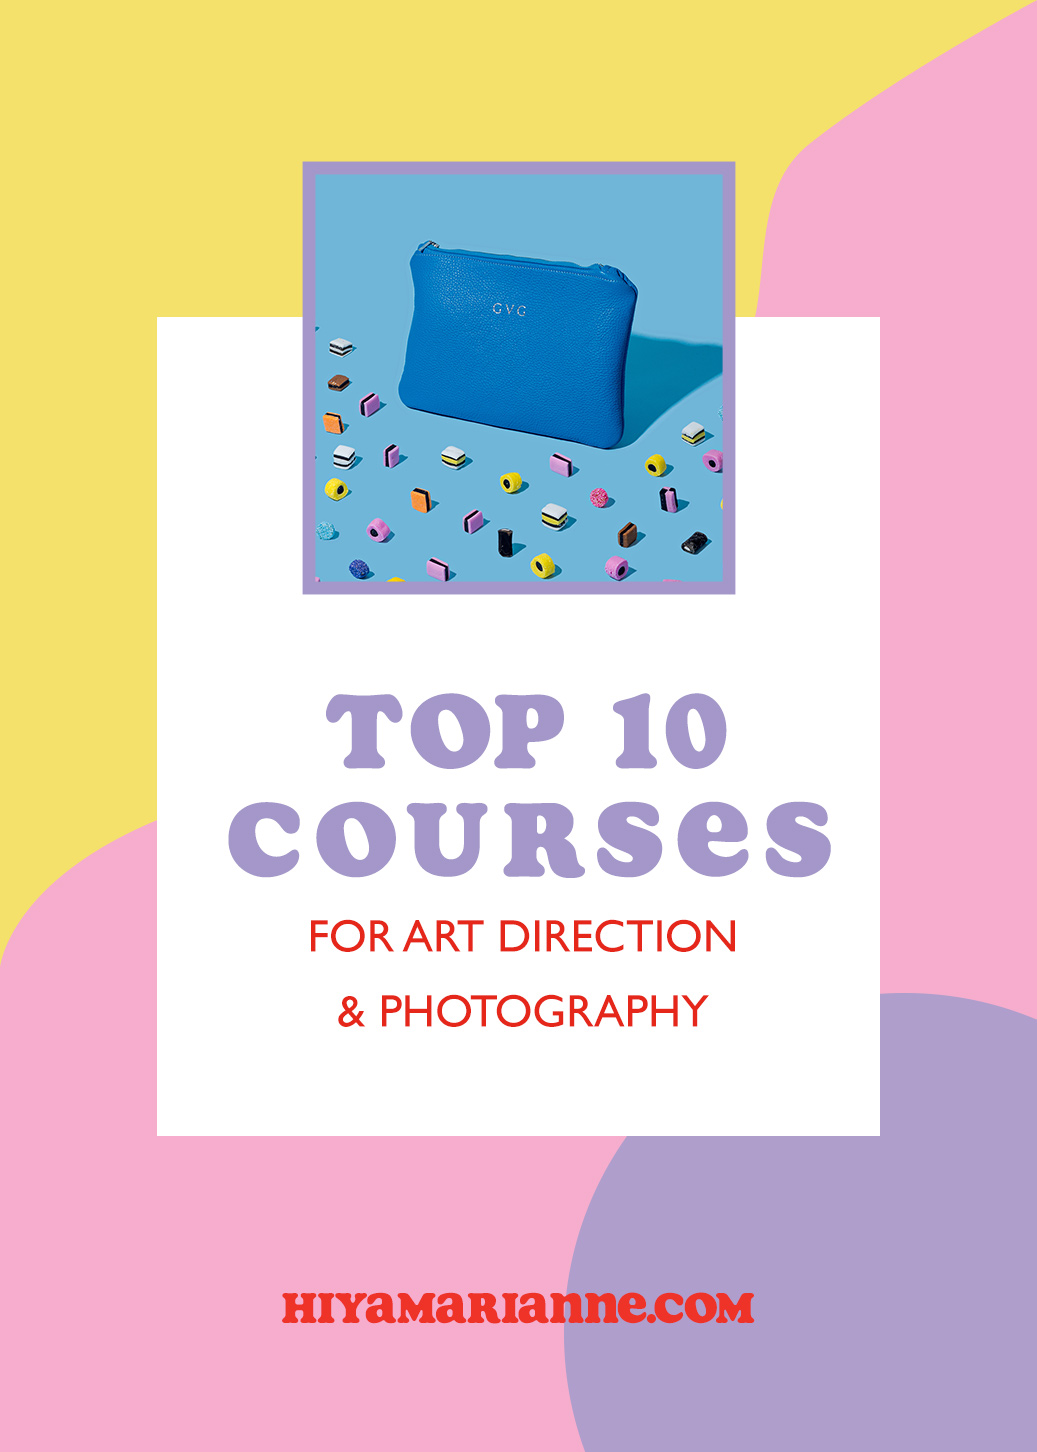 My top 10 favourite Domestika courses for Art Direction and Photography inspiration by HIYA MARIANNE.